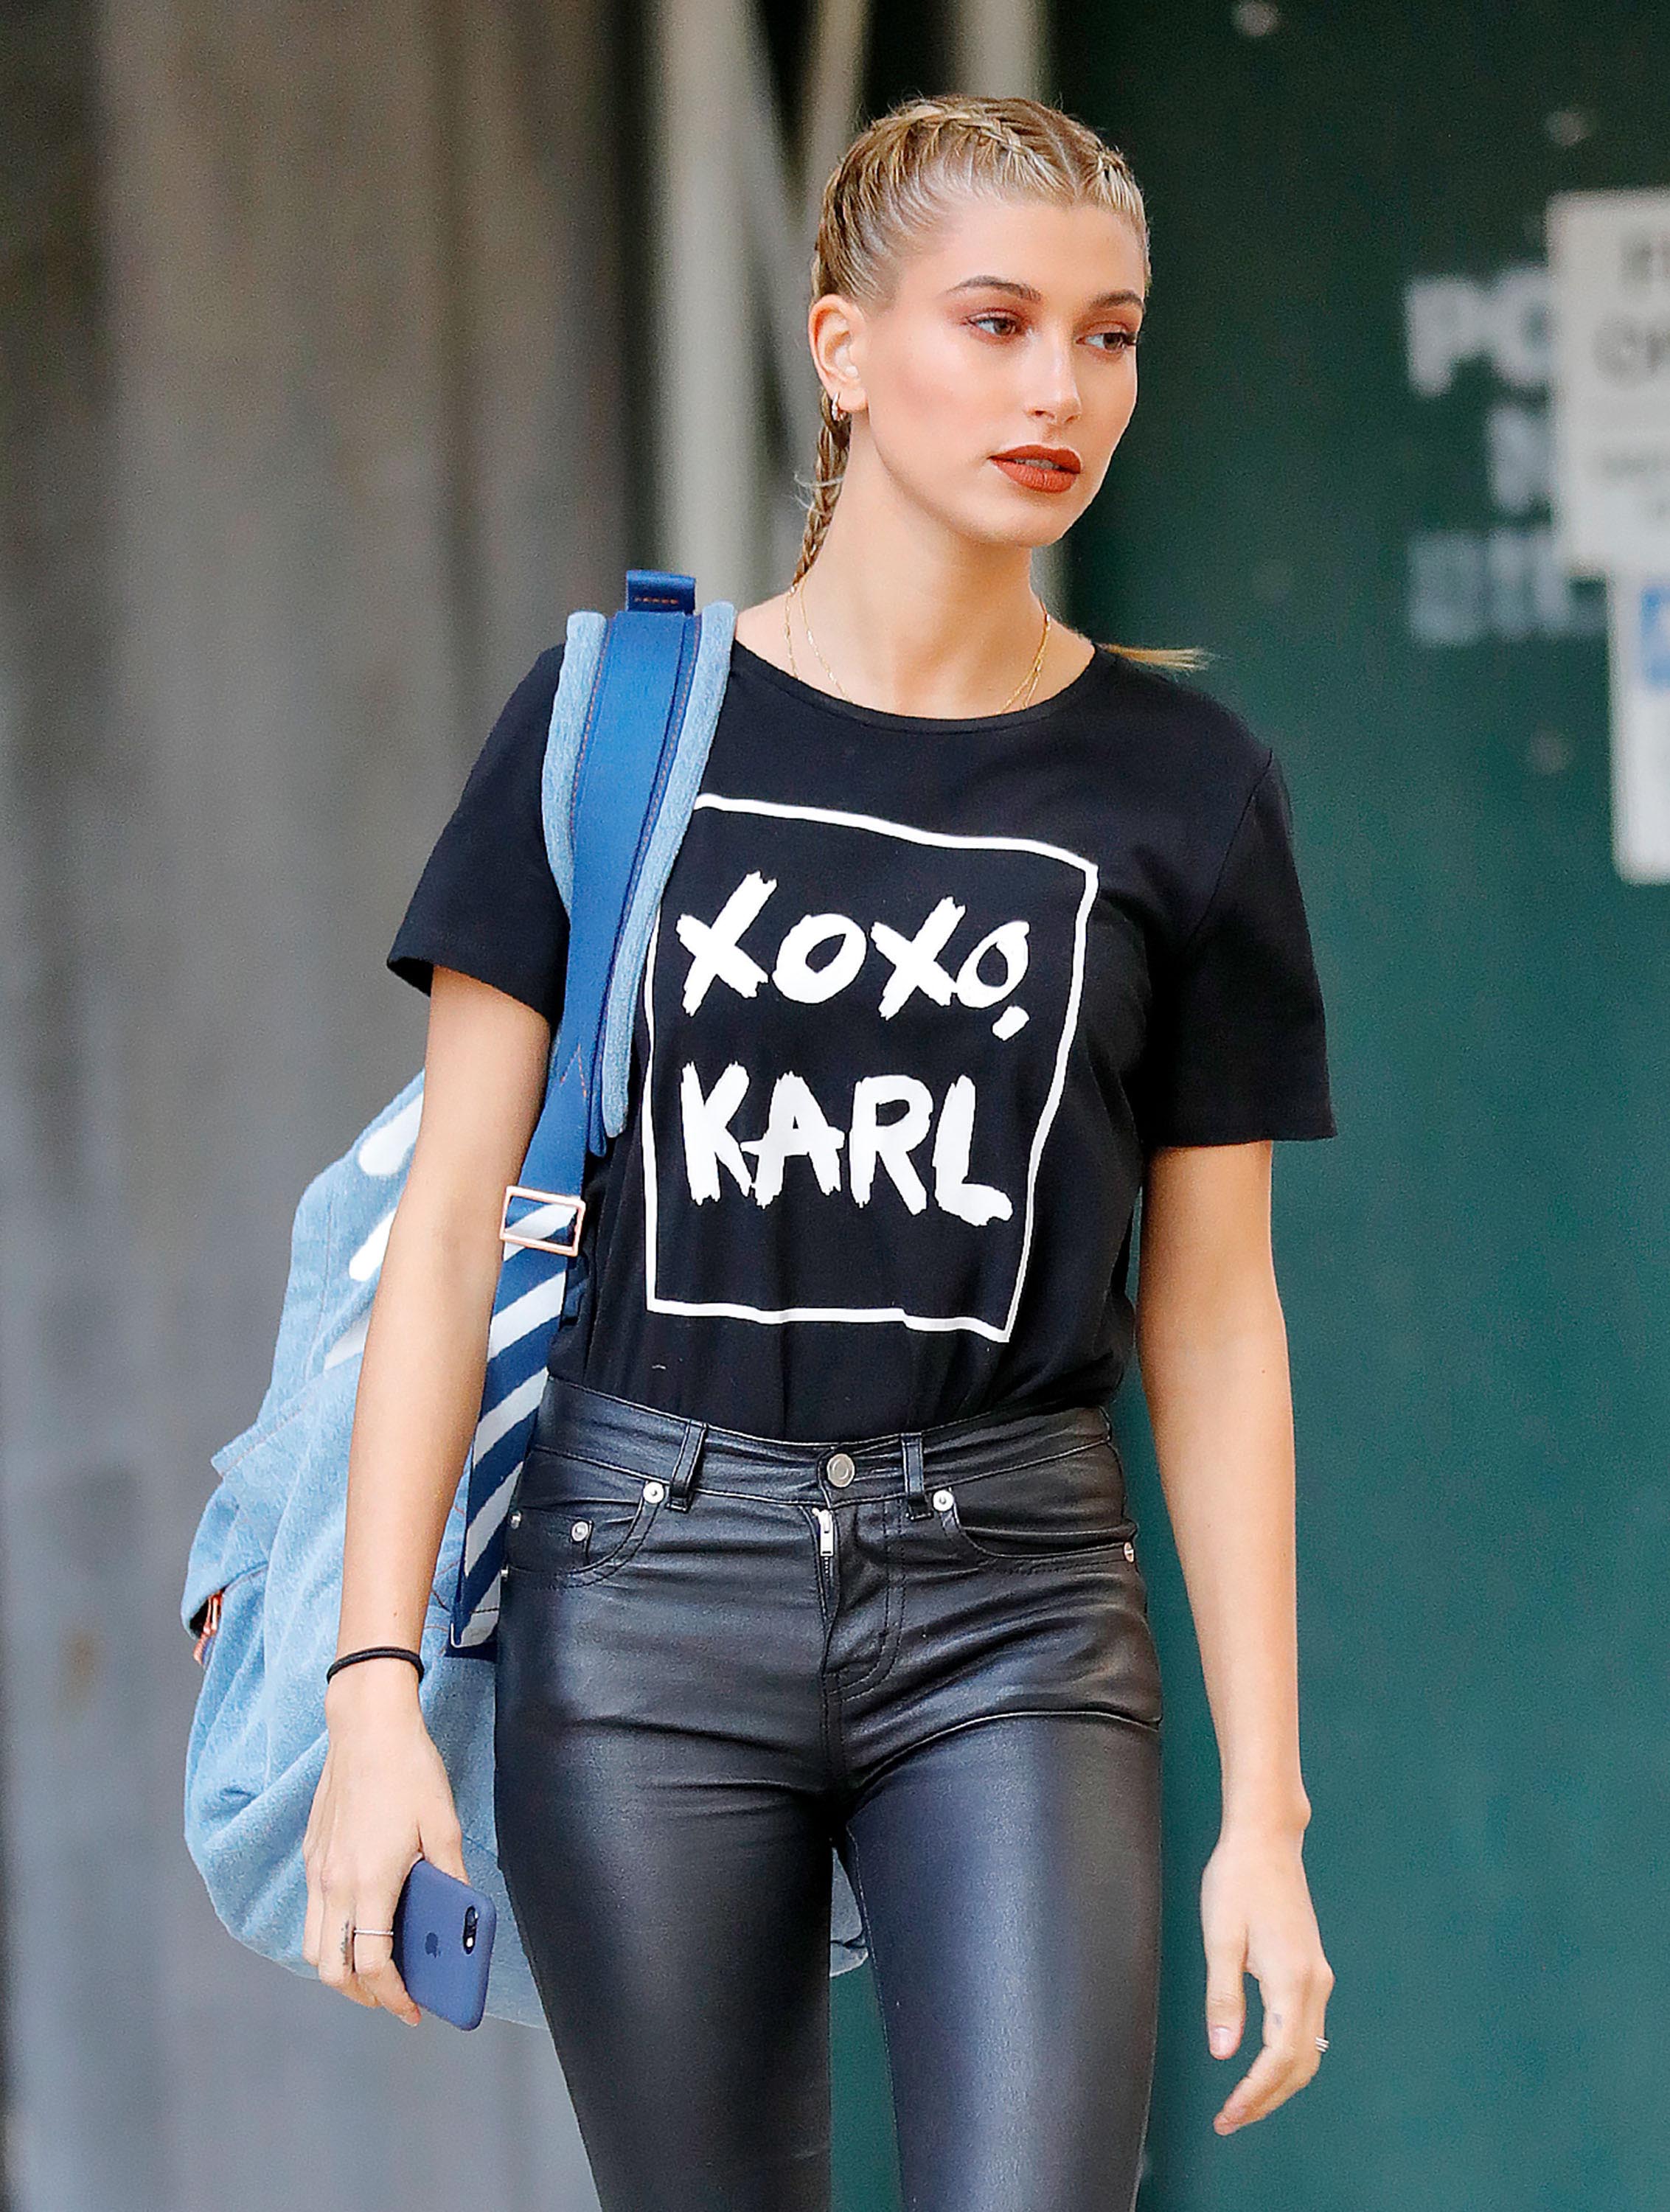 Hailey Baldwin seen out in New York City